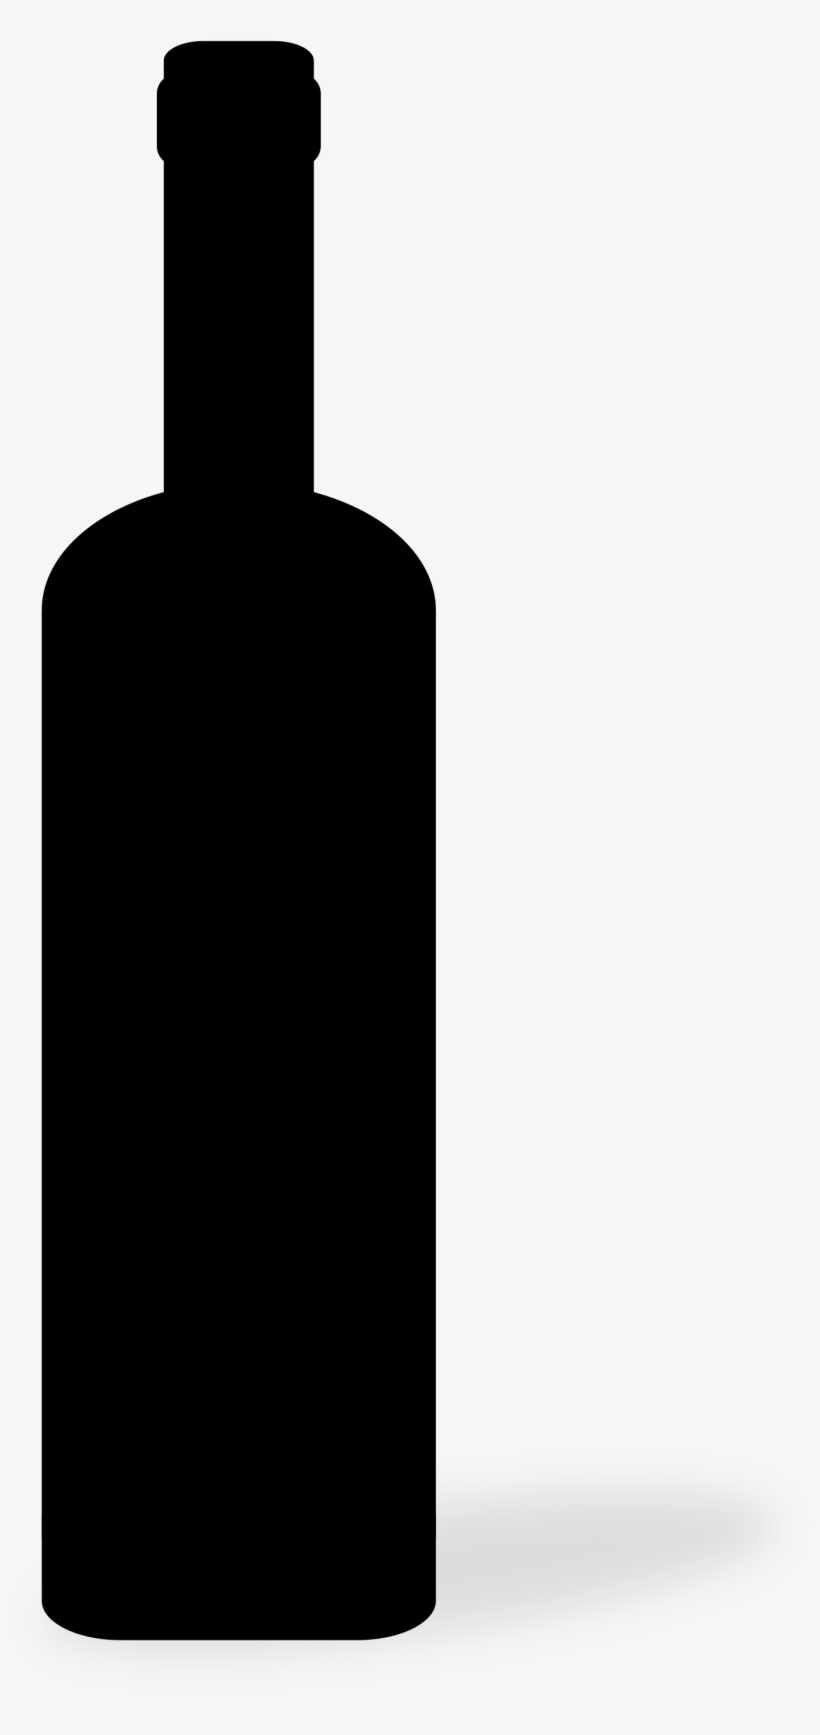 Wine Bottle Silhouette Png, transparent png #122461